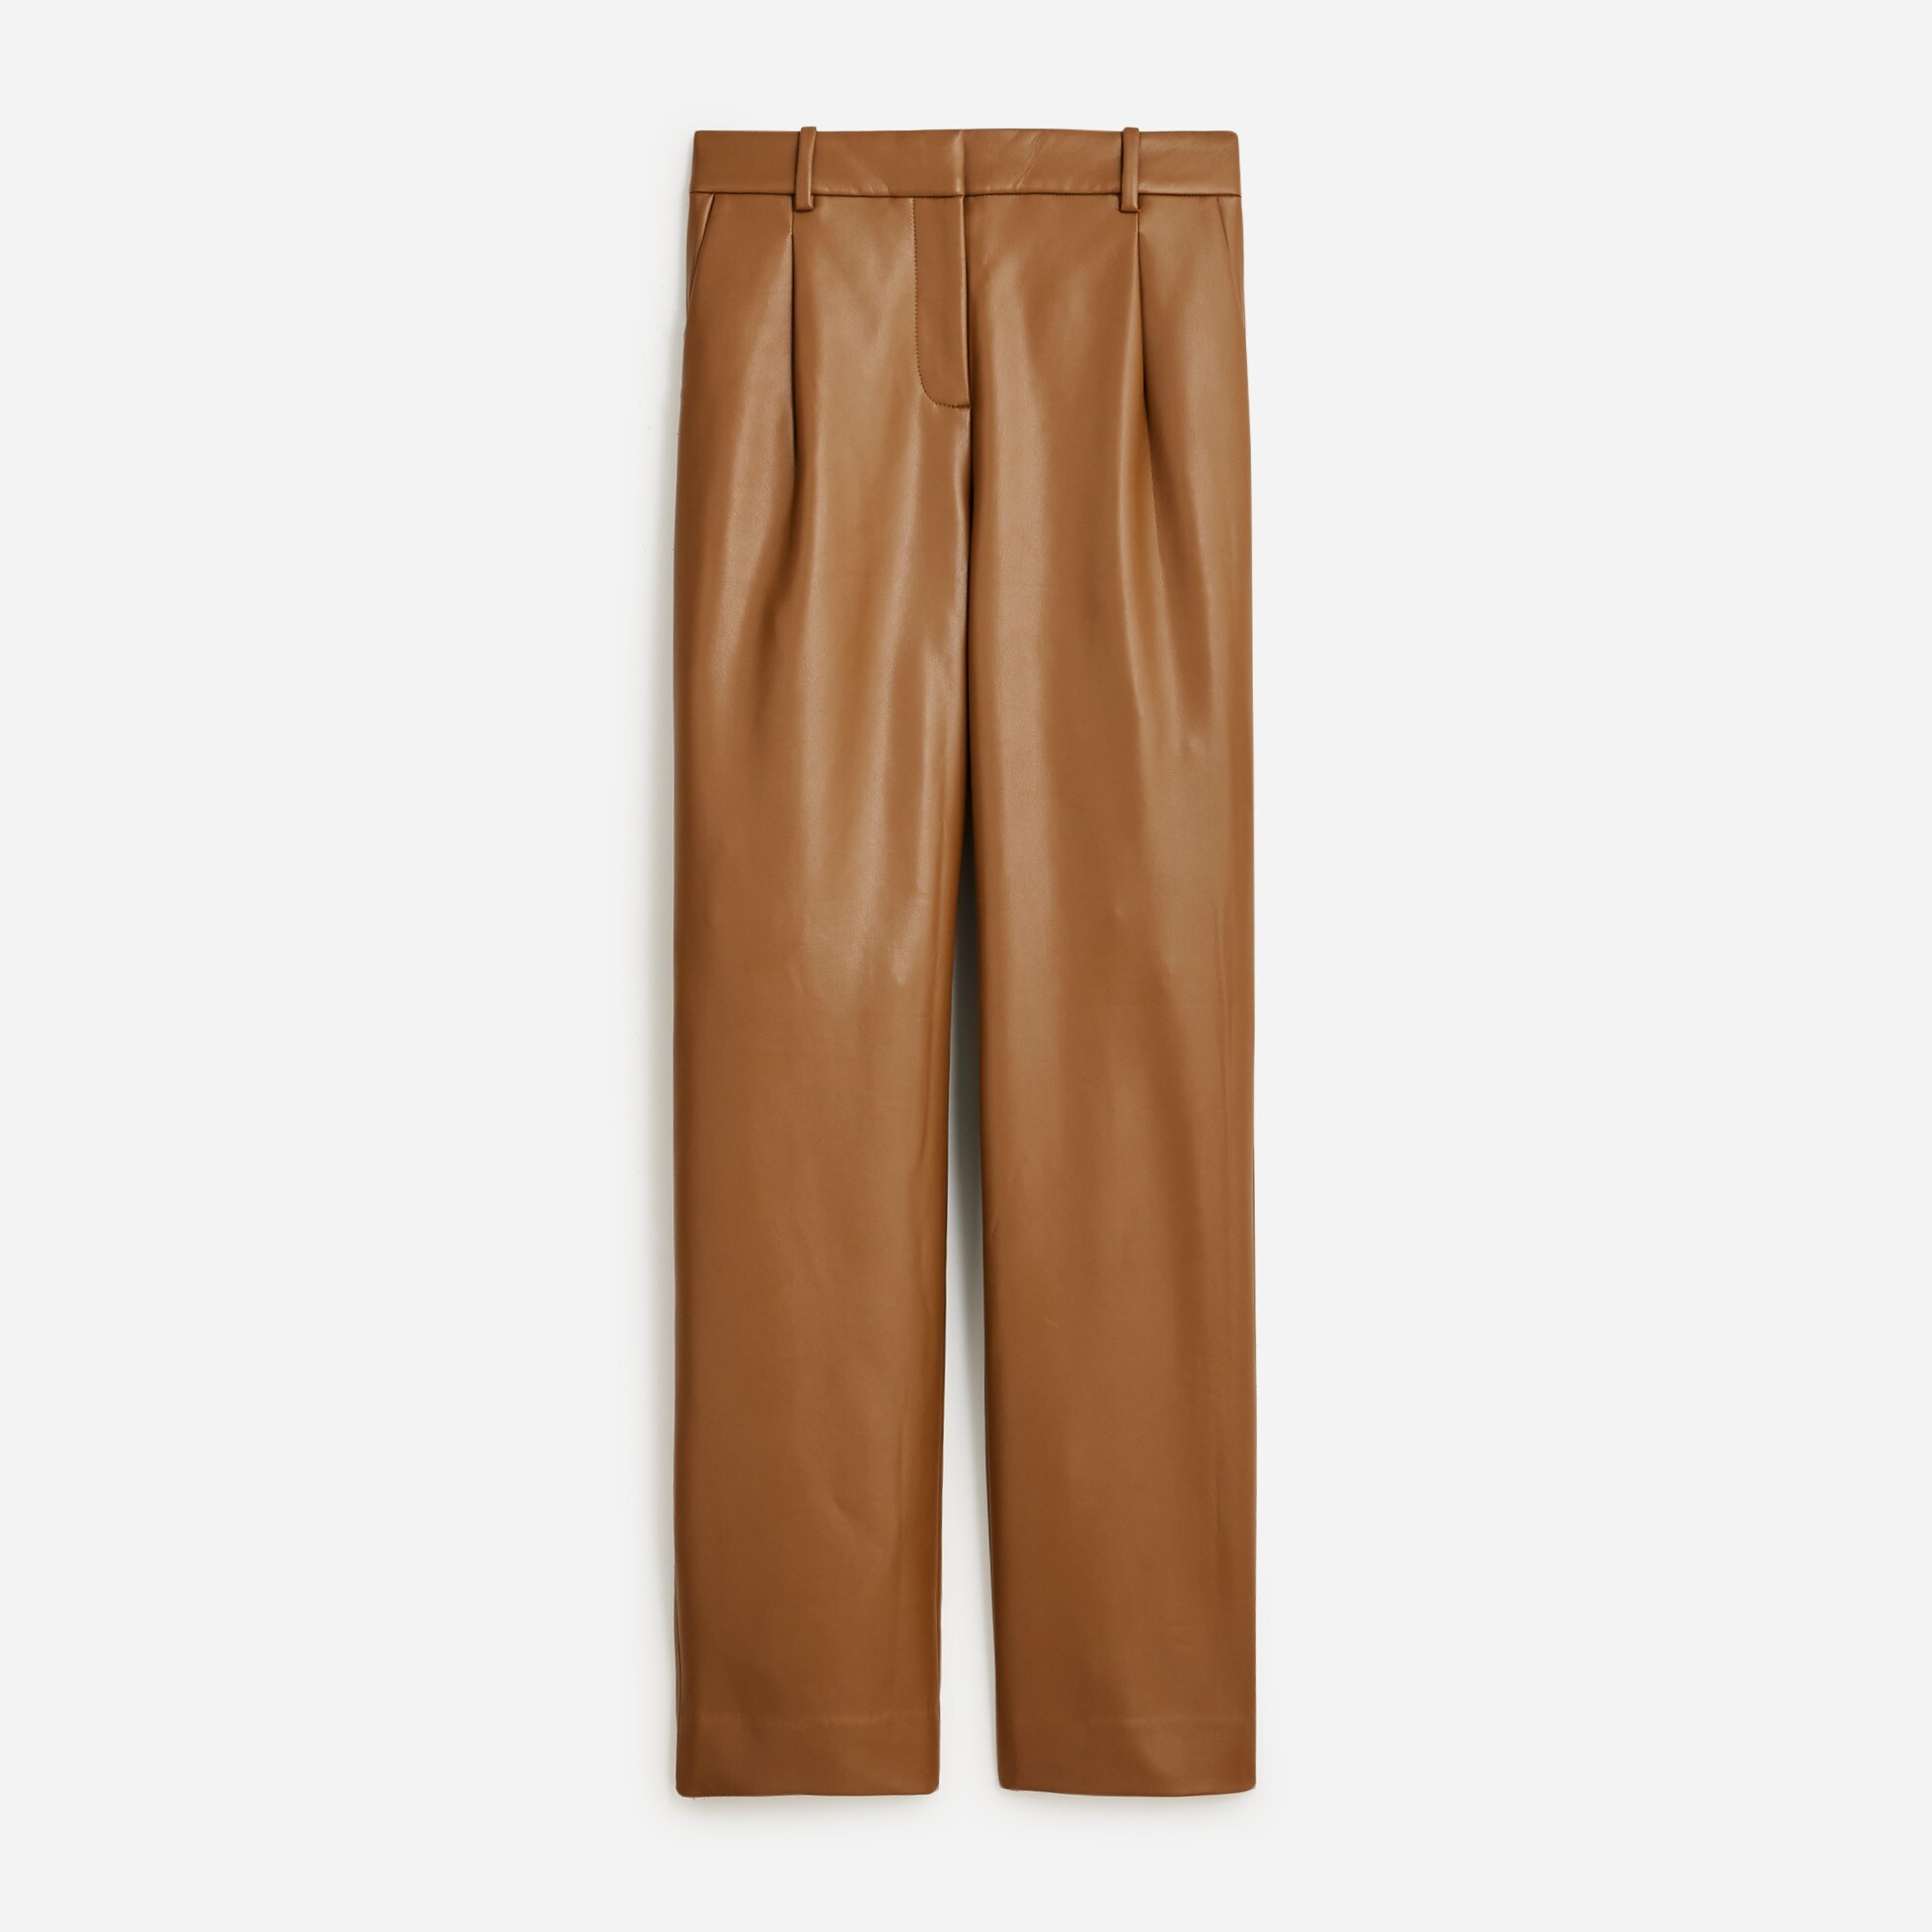  Straight-leg essential pant in faux leather